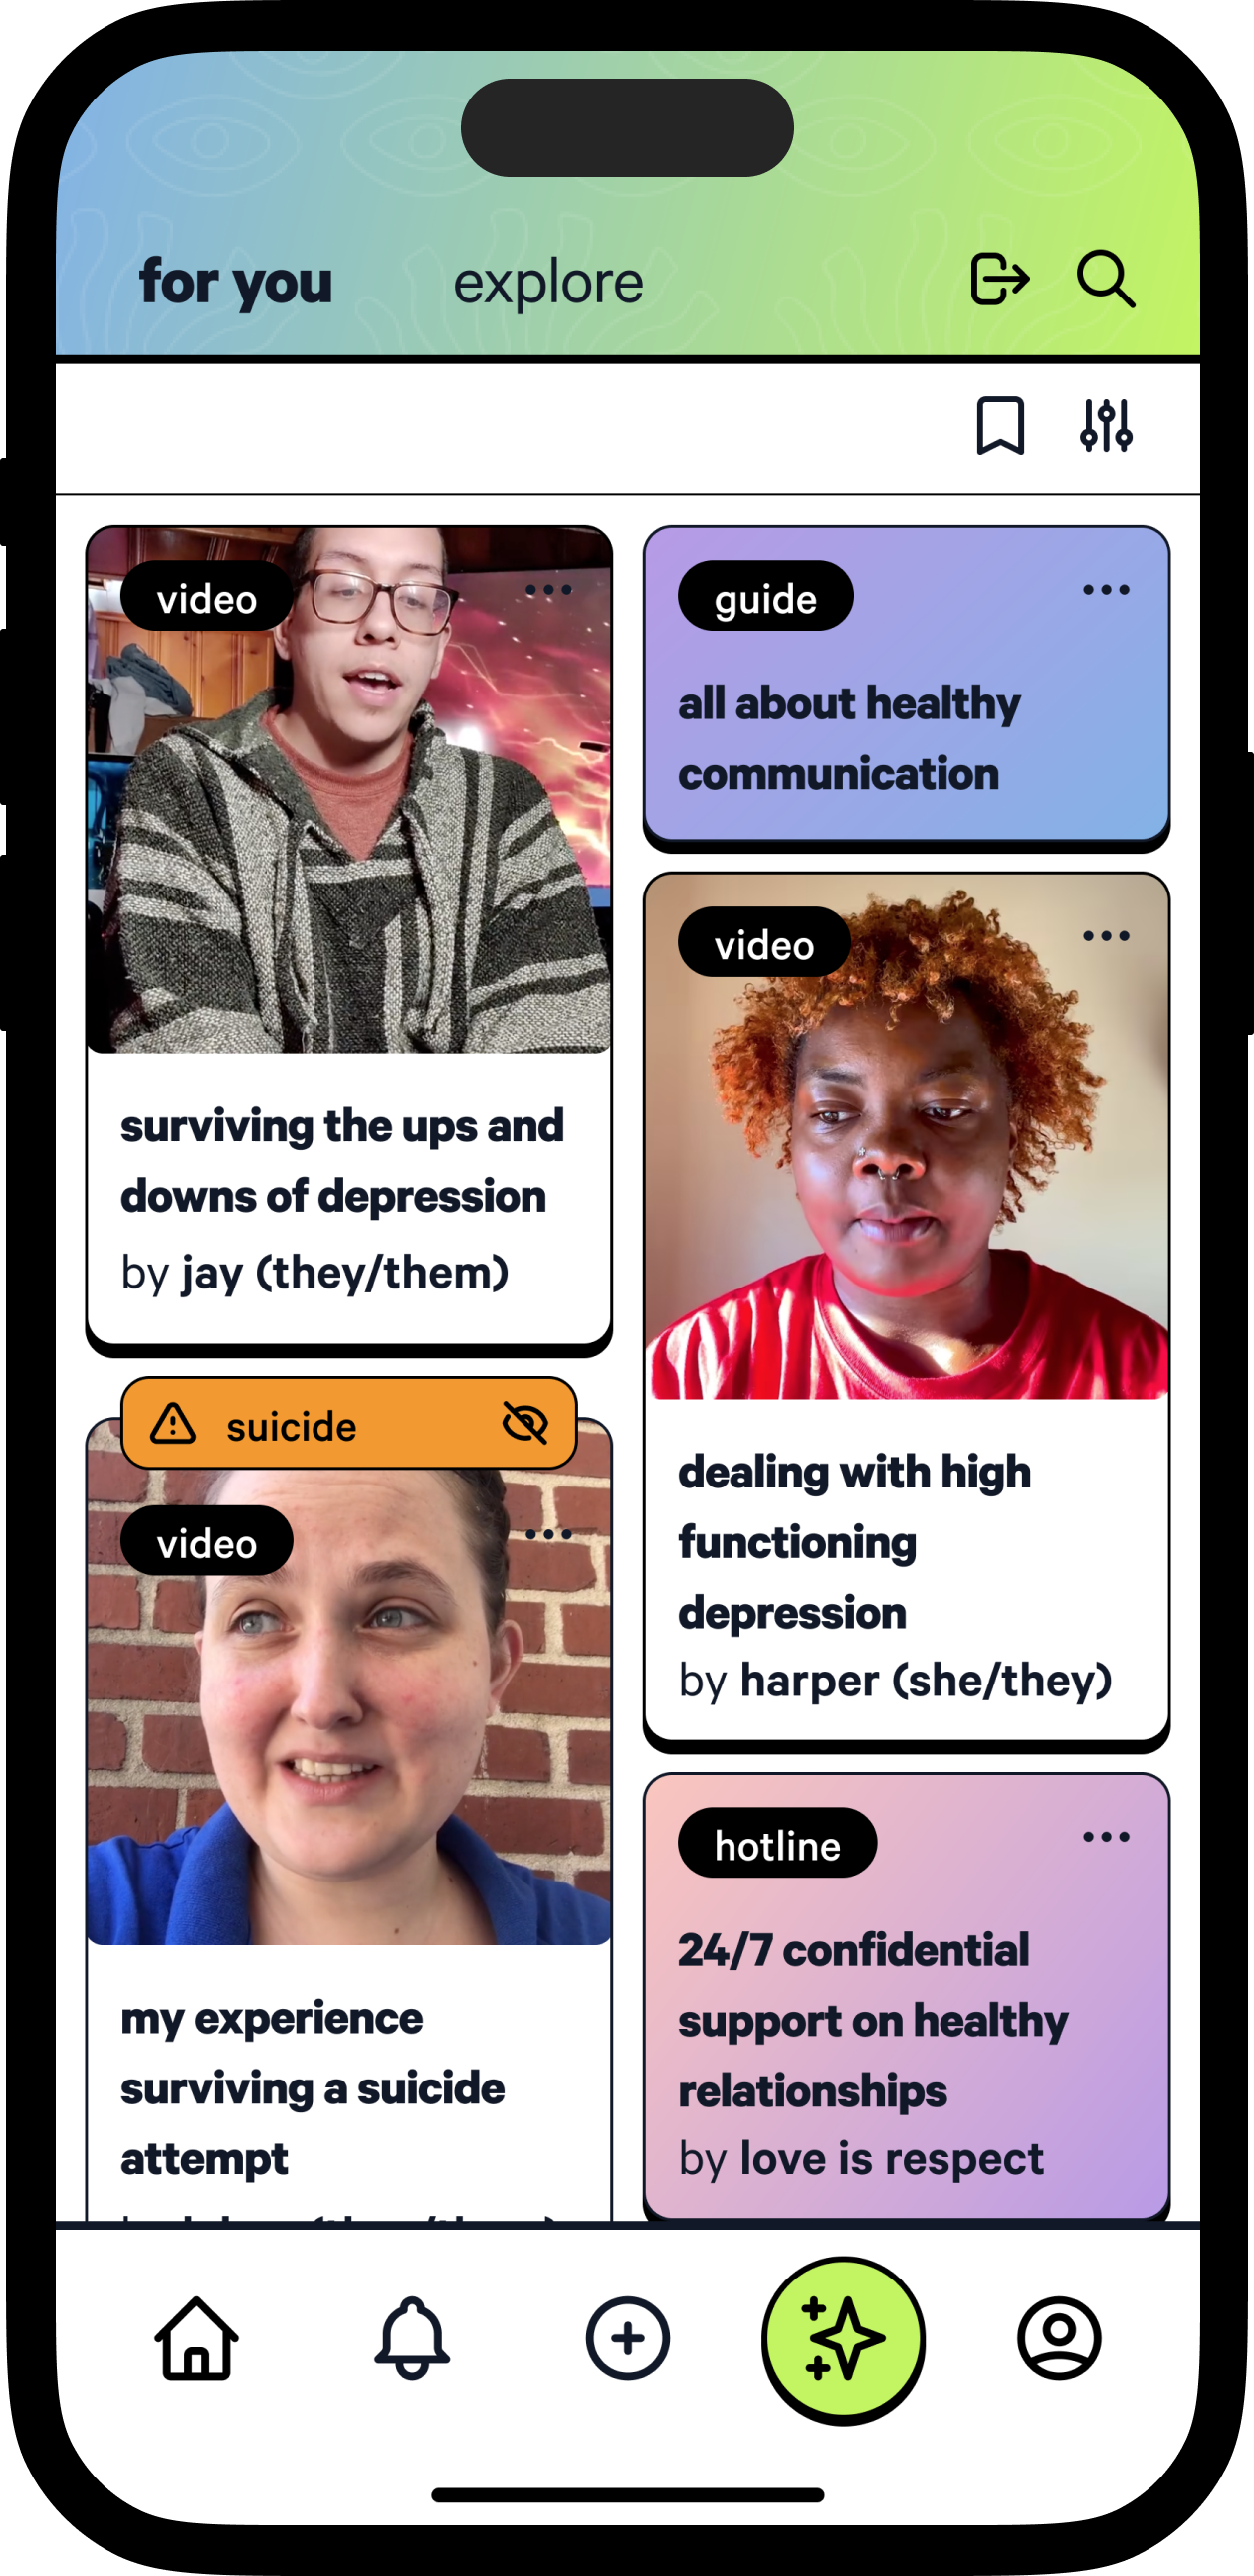 Mobile Platform for Young People Debuts Critical Support Resource Library Centering Holiday Depression and Self-Harm Ideation